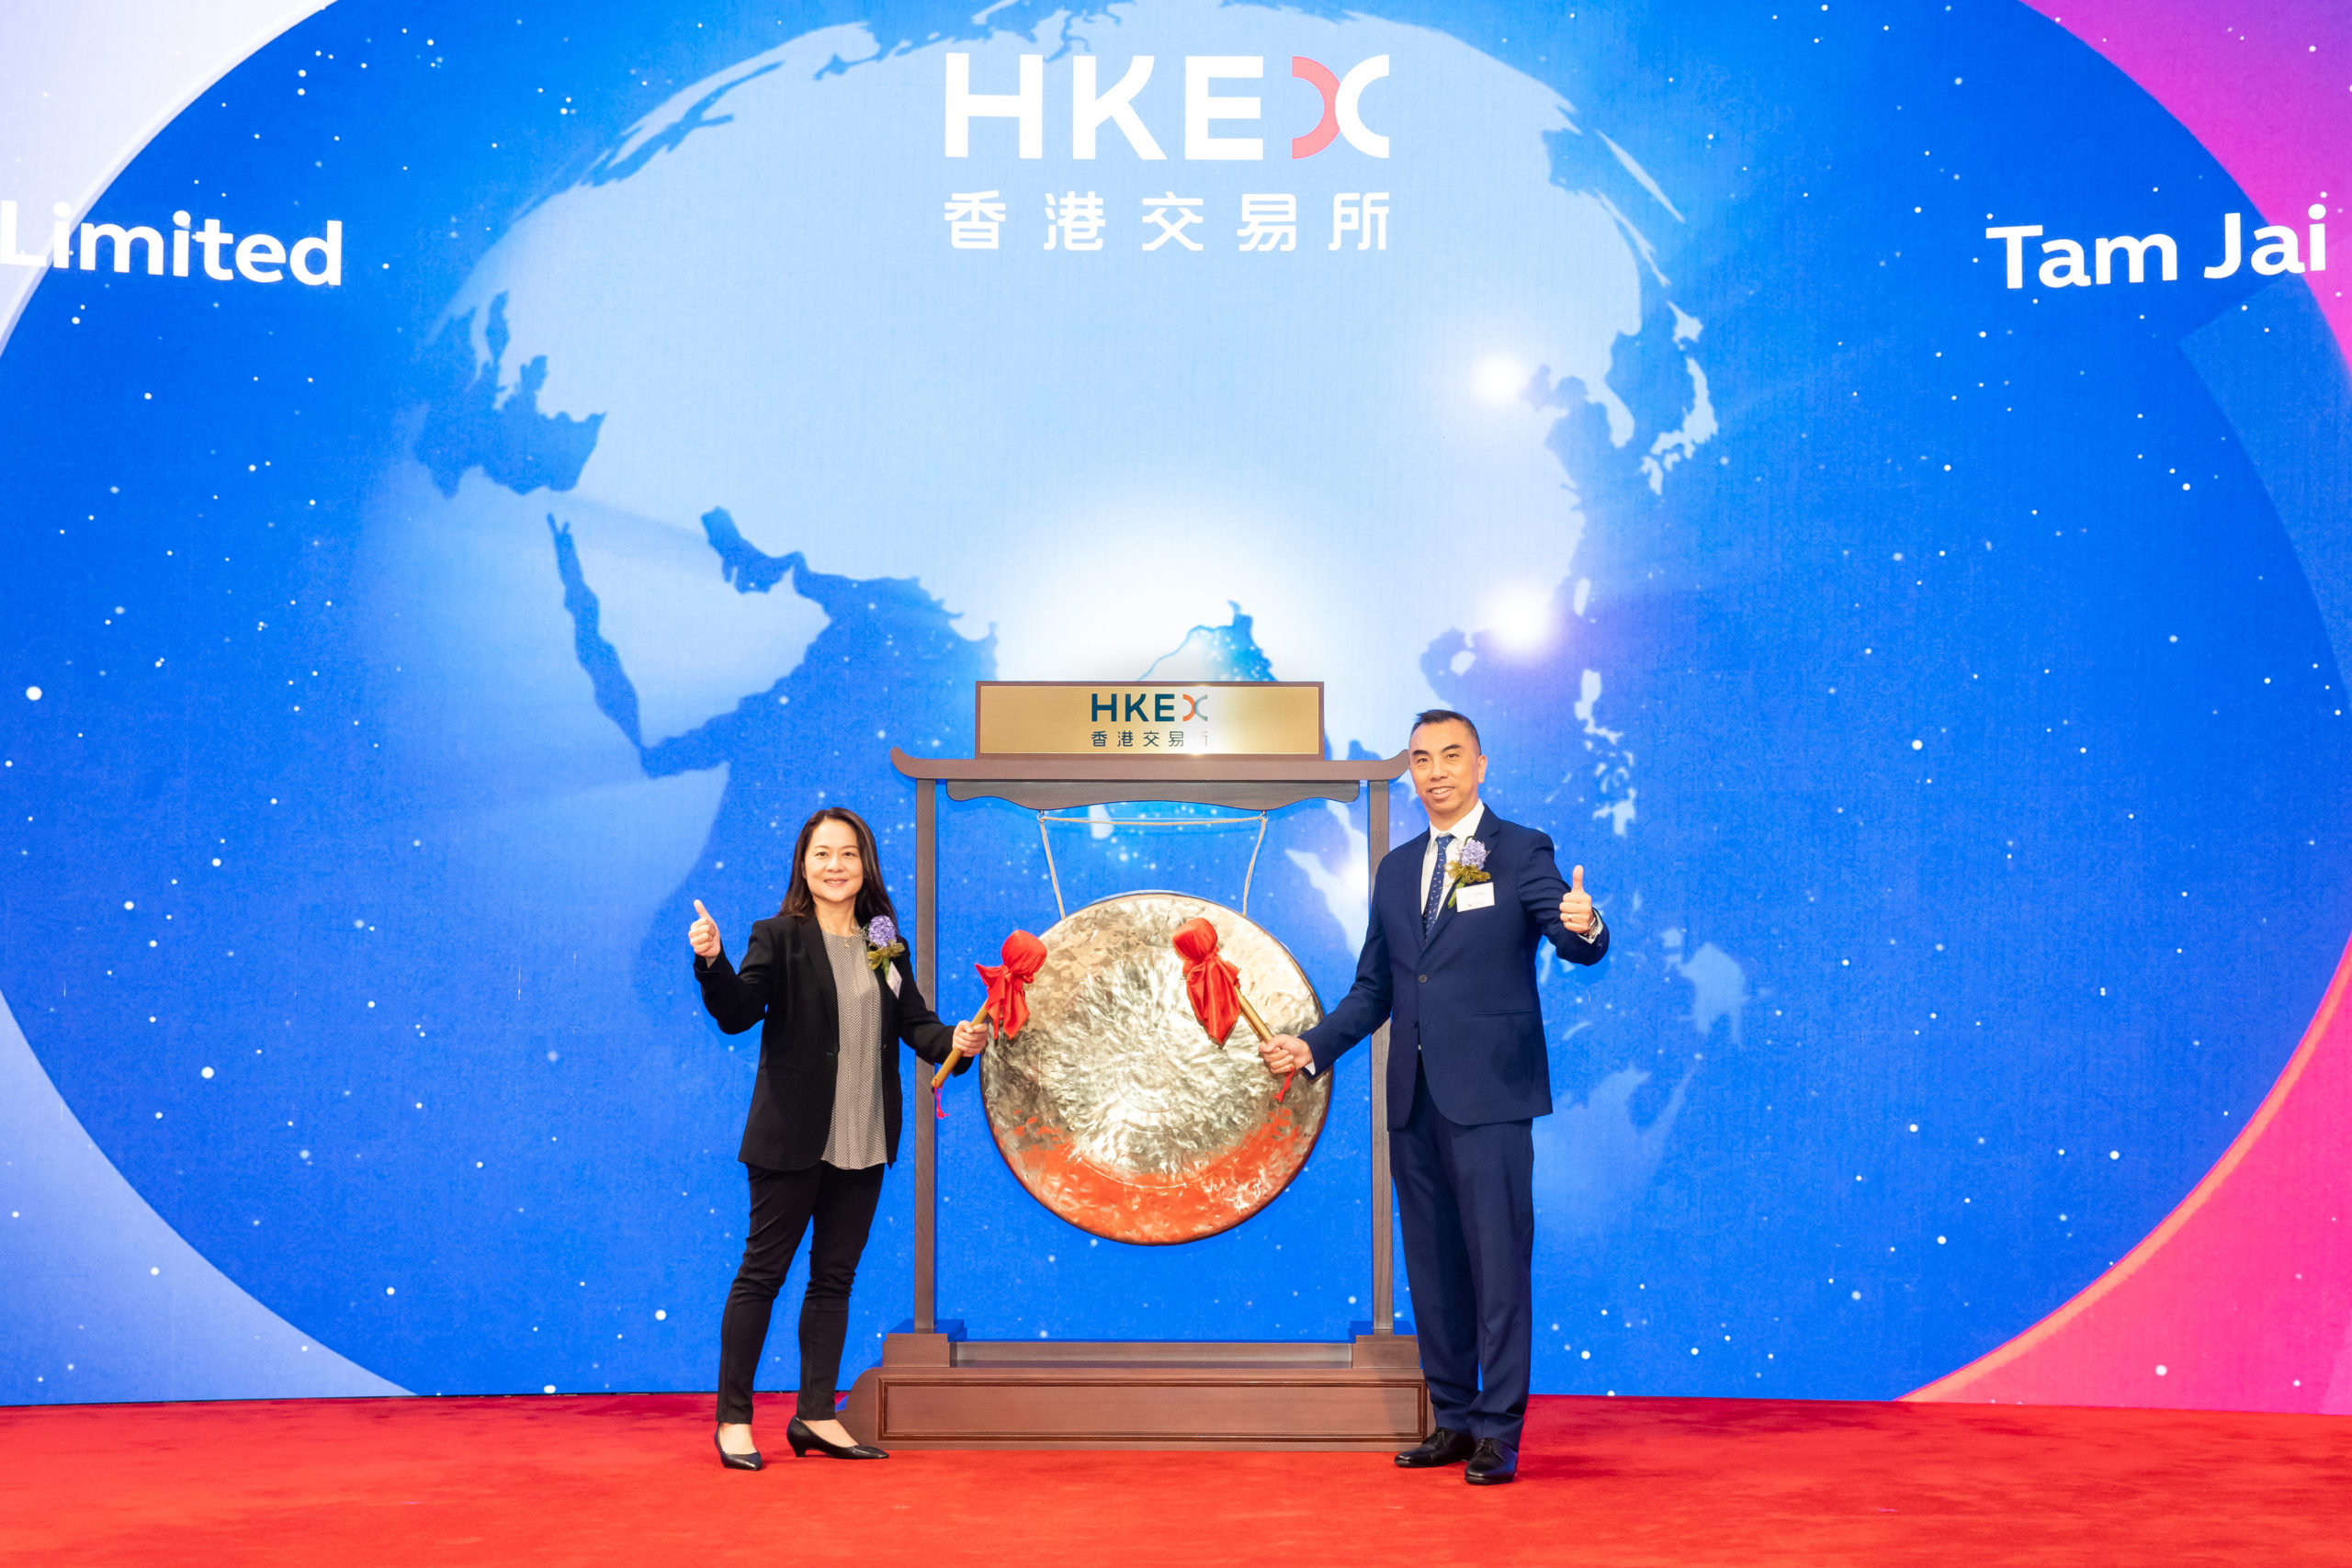 In October 2021, Daren led Tam Jai International to become listed on the HKEX Main Board. He said their next goal is to bring the brand to the world stage.